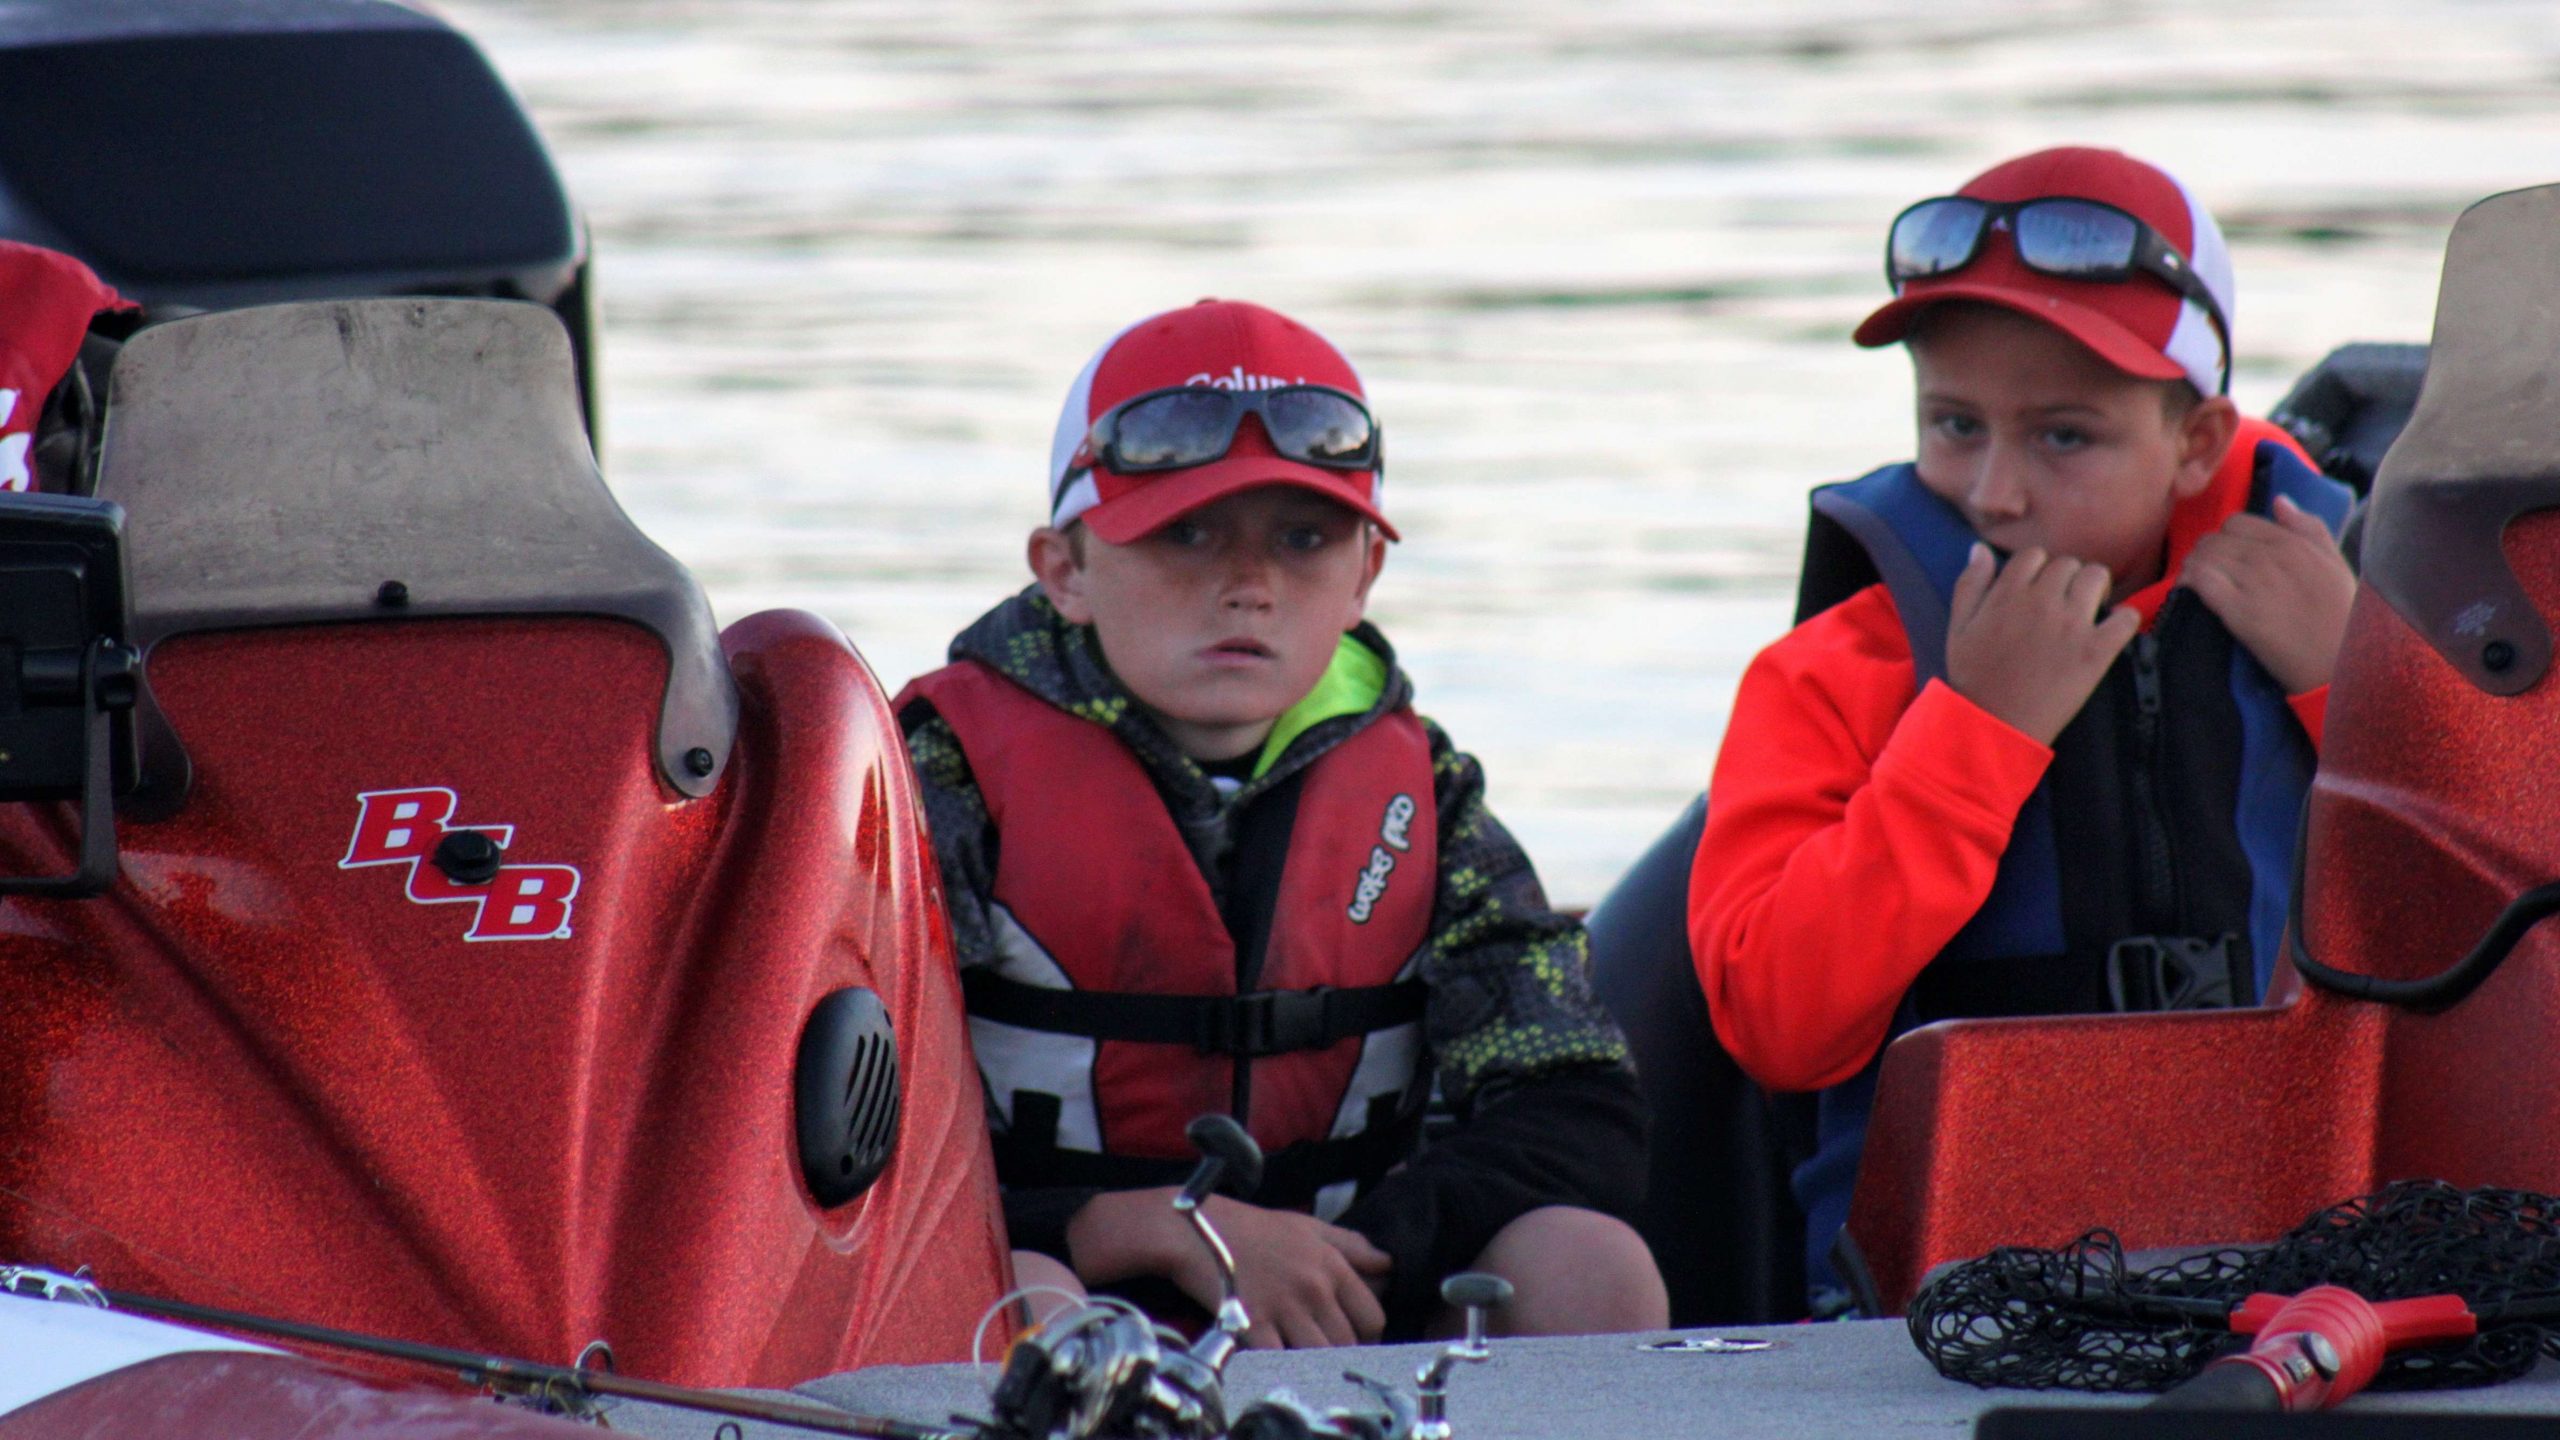 There's a big day ahead for the young anglers, and there are surely some nerves to be overcome. A few minutes on the water though, and all the anglers are loose and ready to fish. 